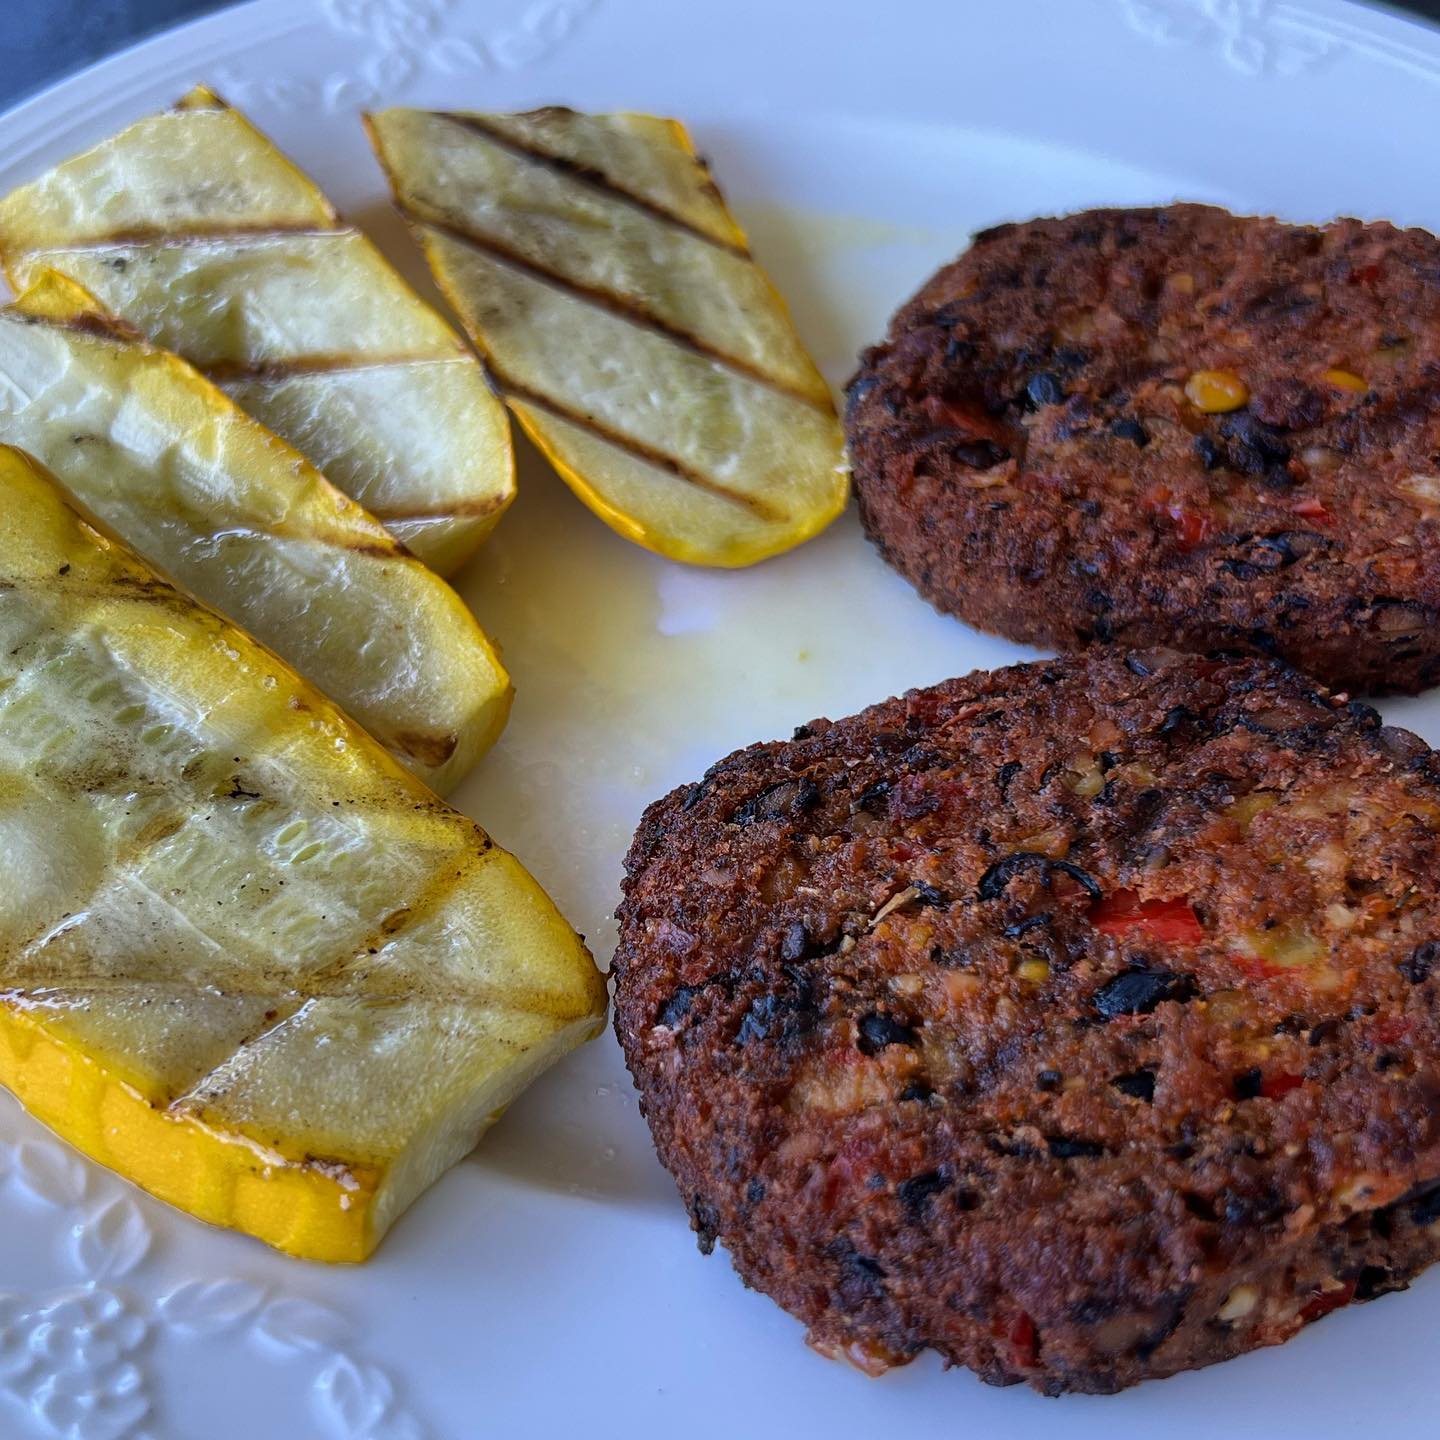 Black bean, cashew patties with yellow zucchini on the for a non-meat lunch